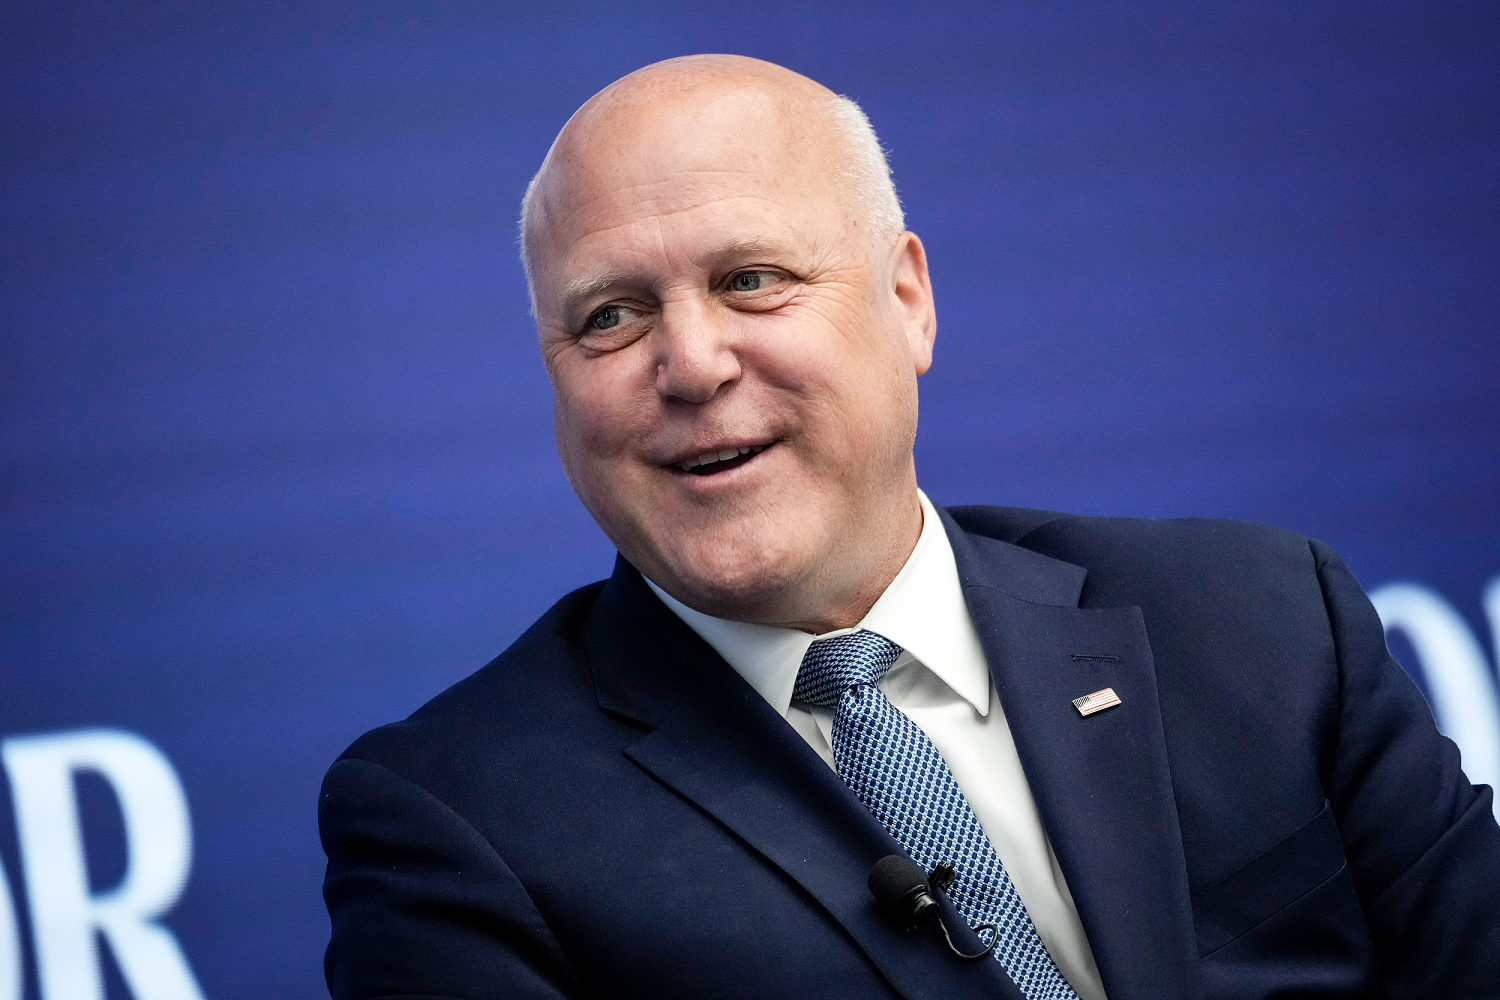 Top Biden adviser Mitch Landrieu expected to leave the White House